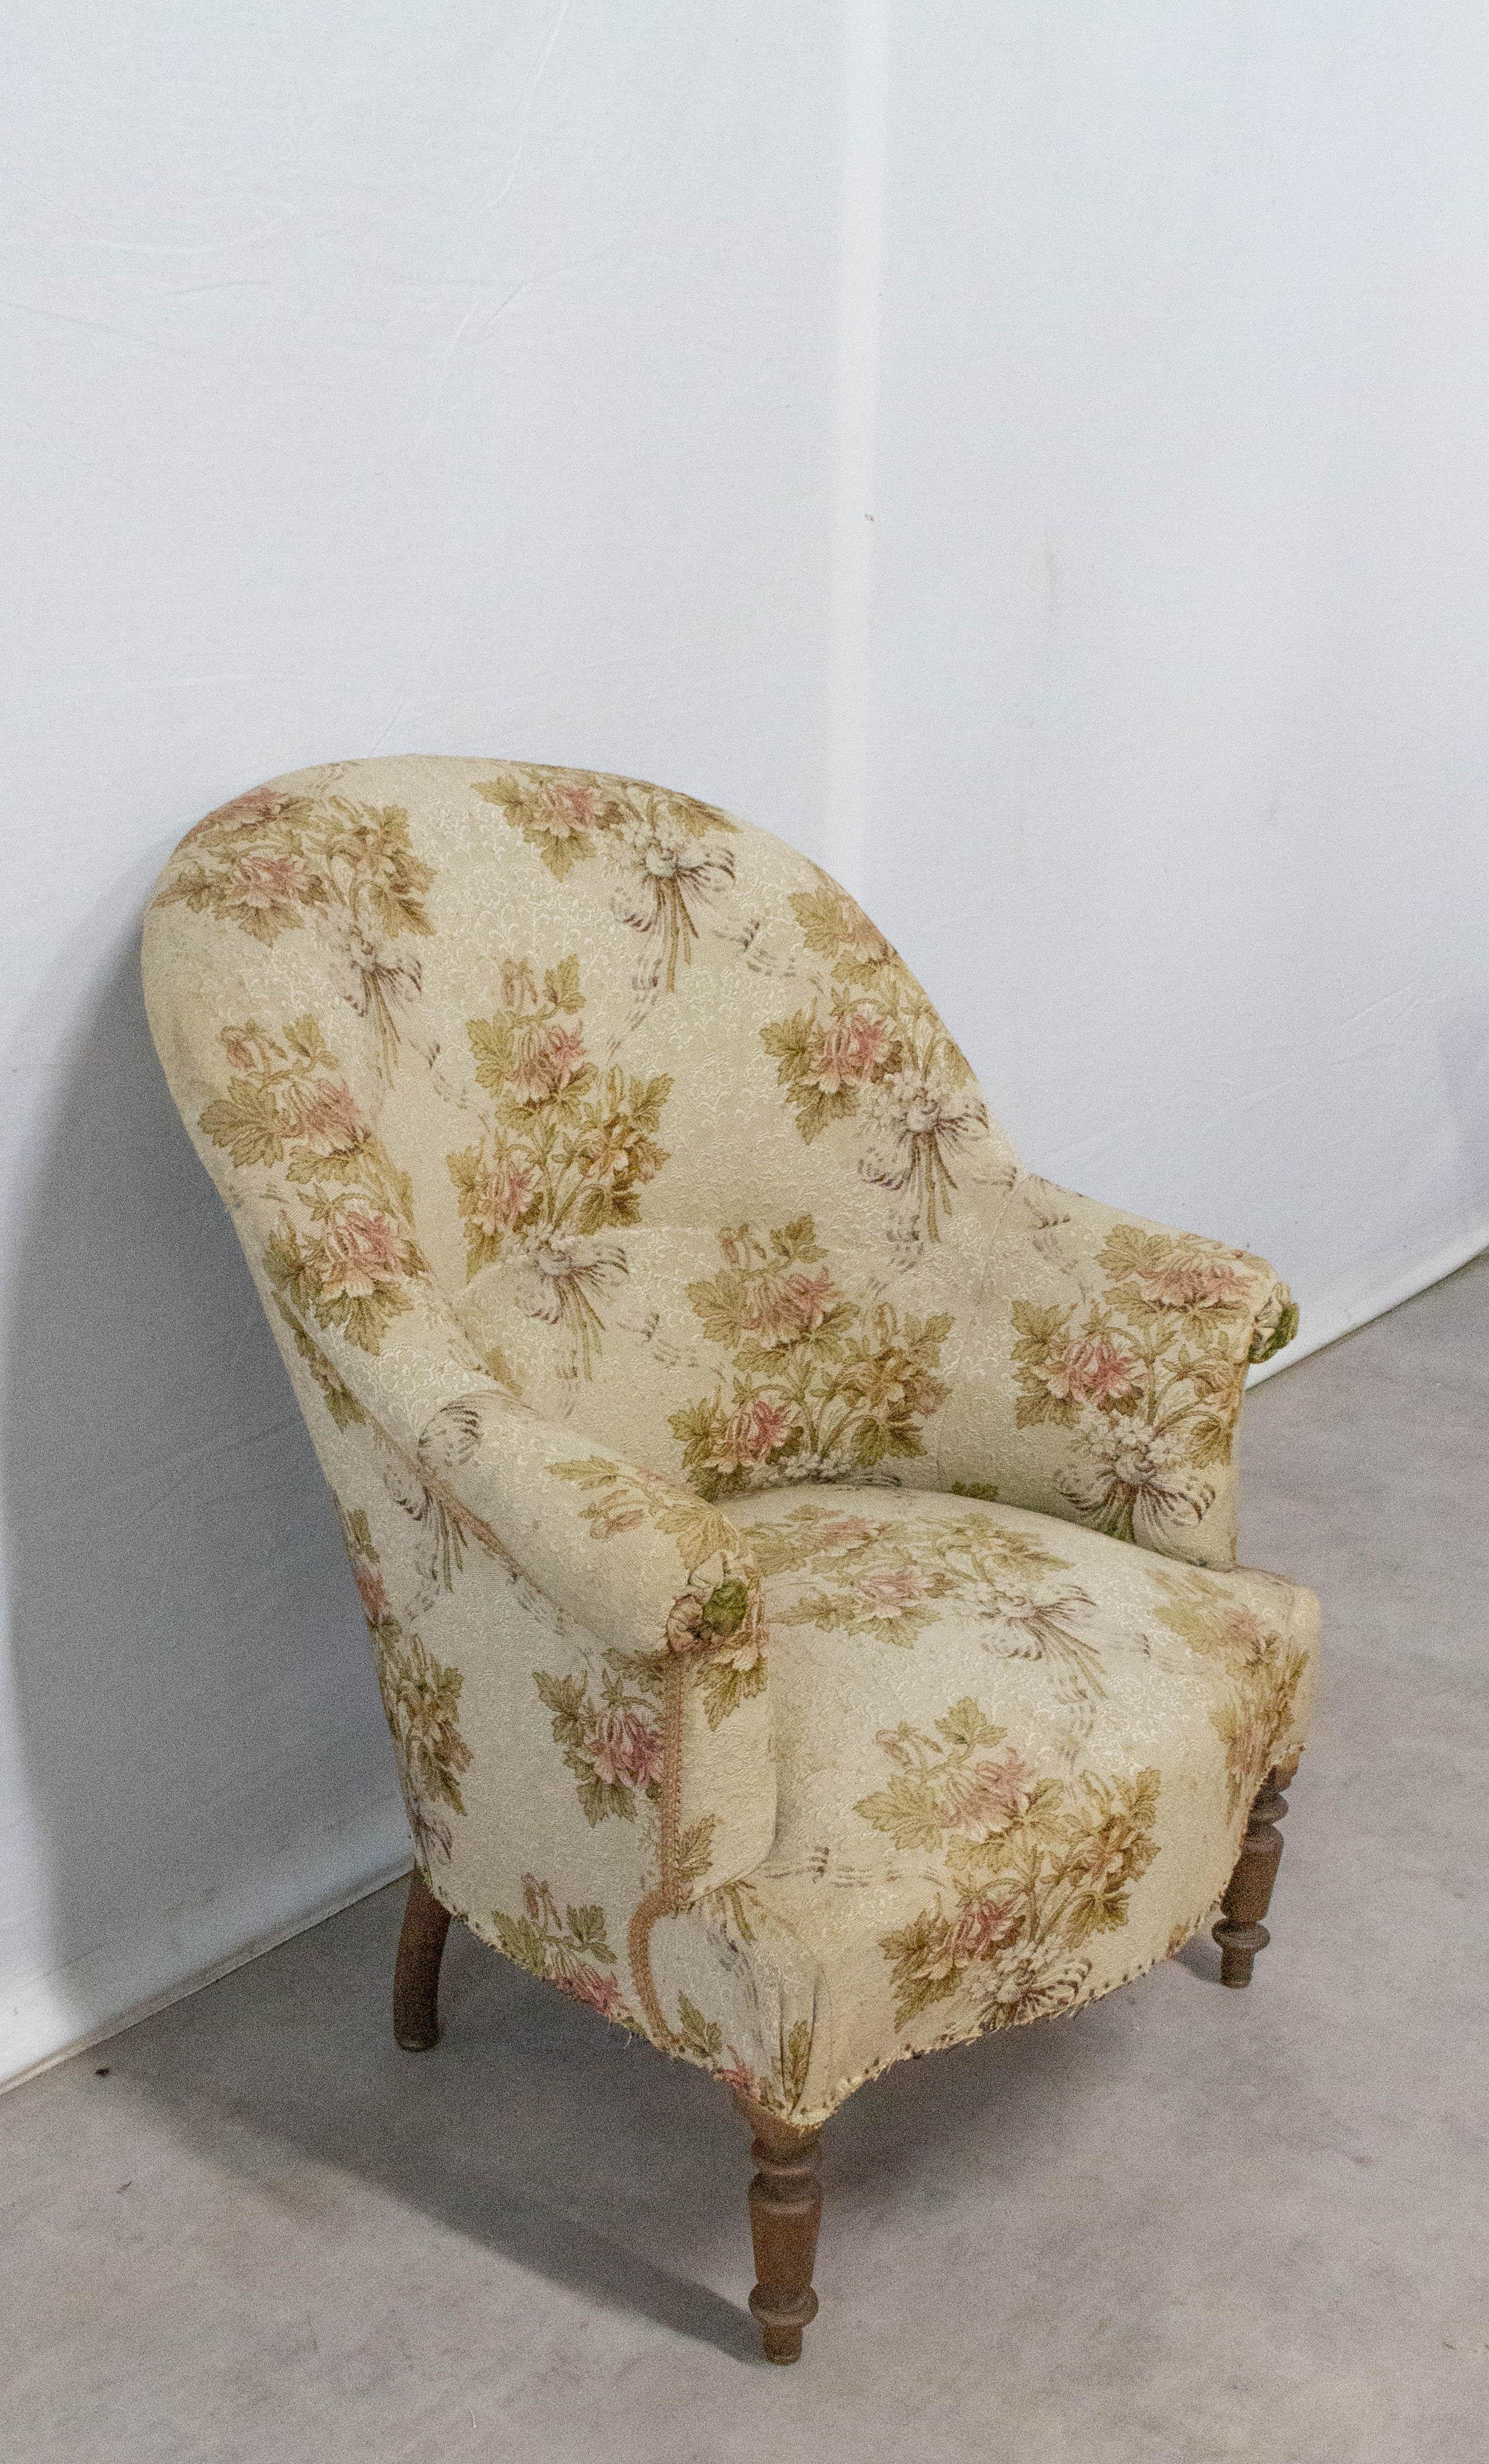 Fauteuil Crapaud French Napoleon III, circa 1890
Antique, 19th century
To recover in fabric of your choice to suit your interior
Sound and solid, the upholstery is good.
Very comfortable.

For shipping:
91/ 77 /70 cm 16 kg.
   